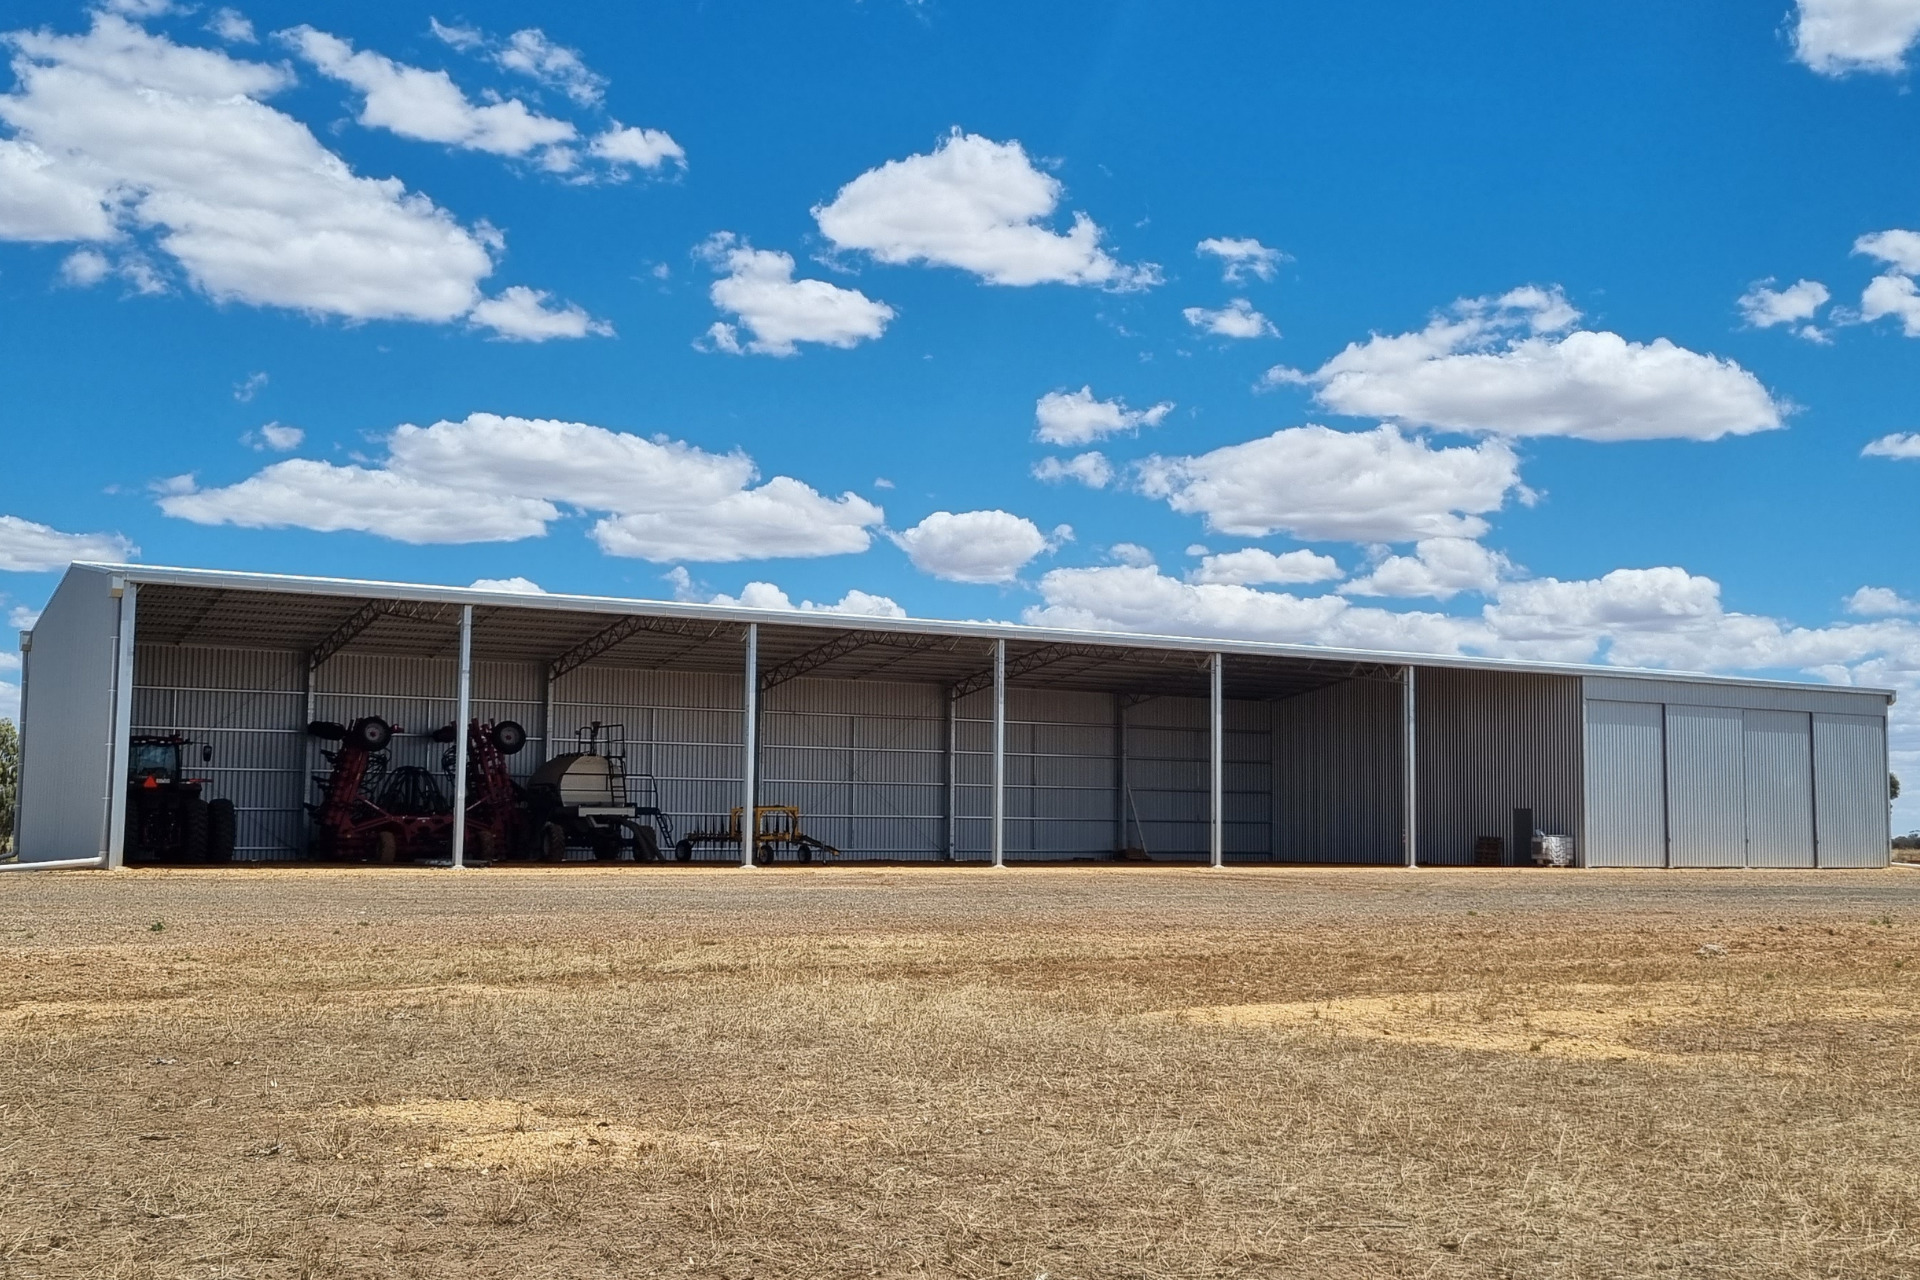 You are currently viewing 64m x 18m x 6m machinery shed with enclosed bays